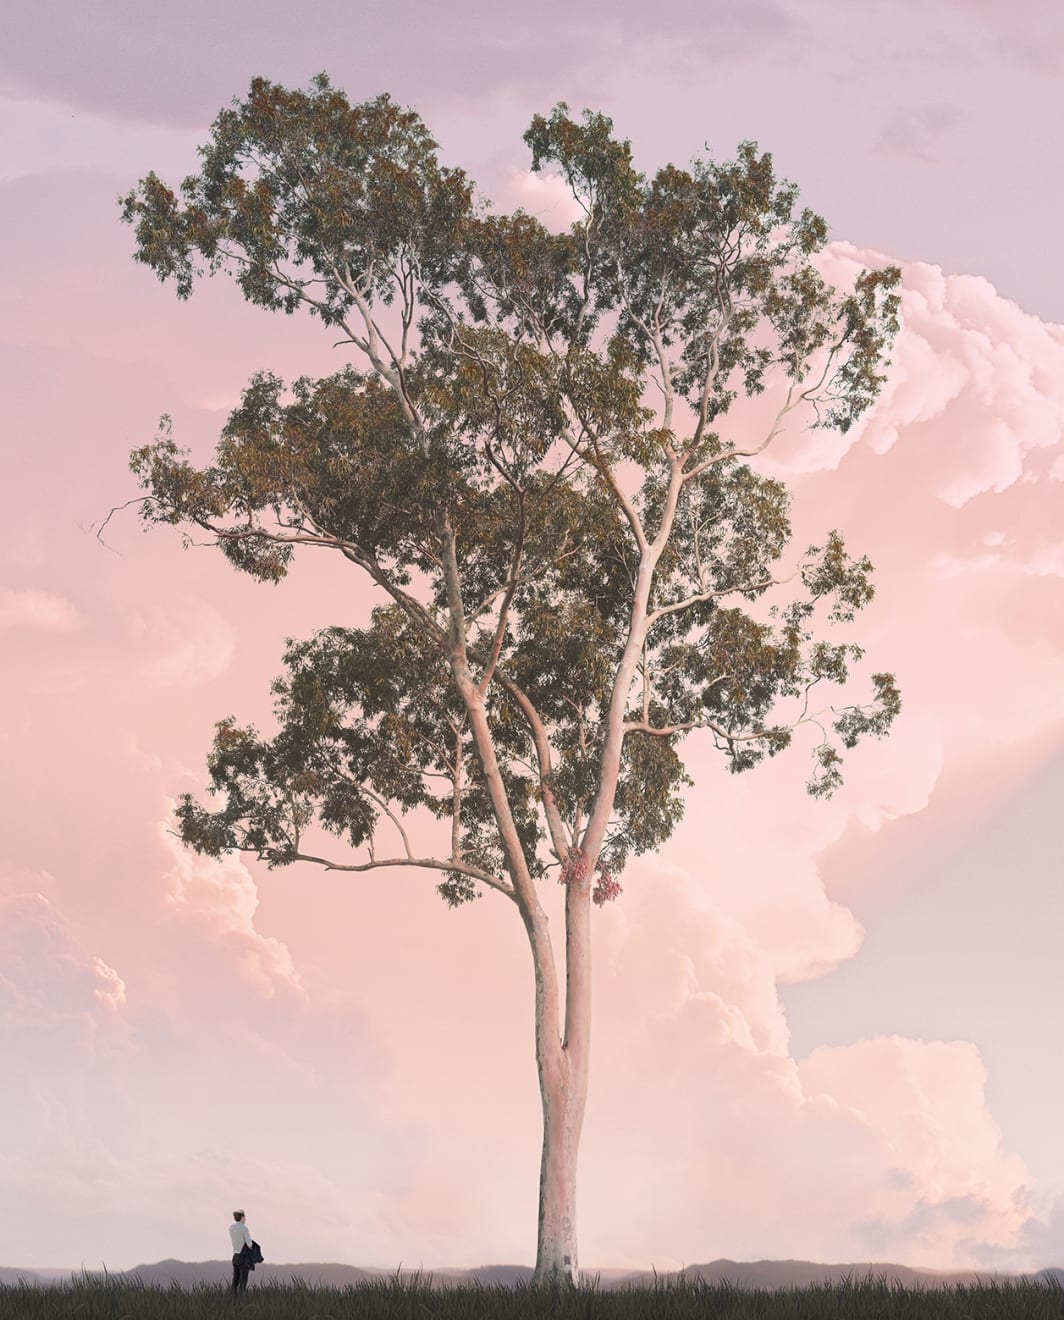 Morning Tree Archival Pigment Print 115 x 139cm Edition of 10 plus 2 artist's proofs Unframed - AUD $2860 GBP £1480 USD $1690 Framed - AUD $4080 GBP £2110 USD $2410